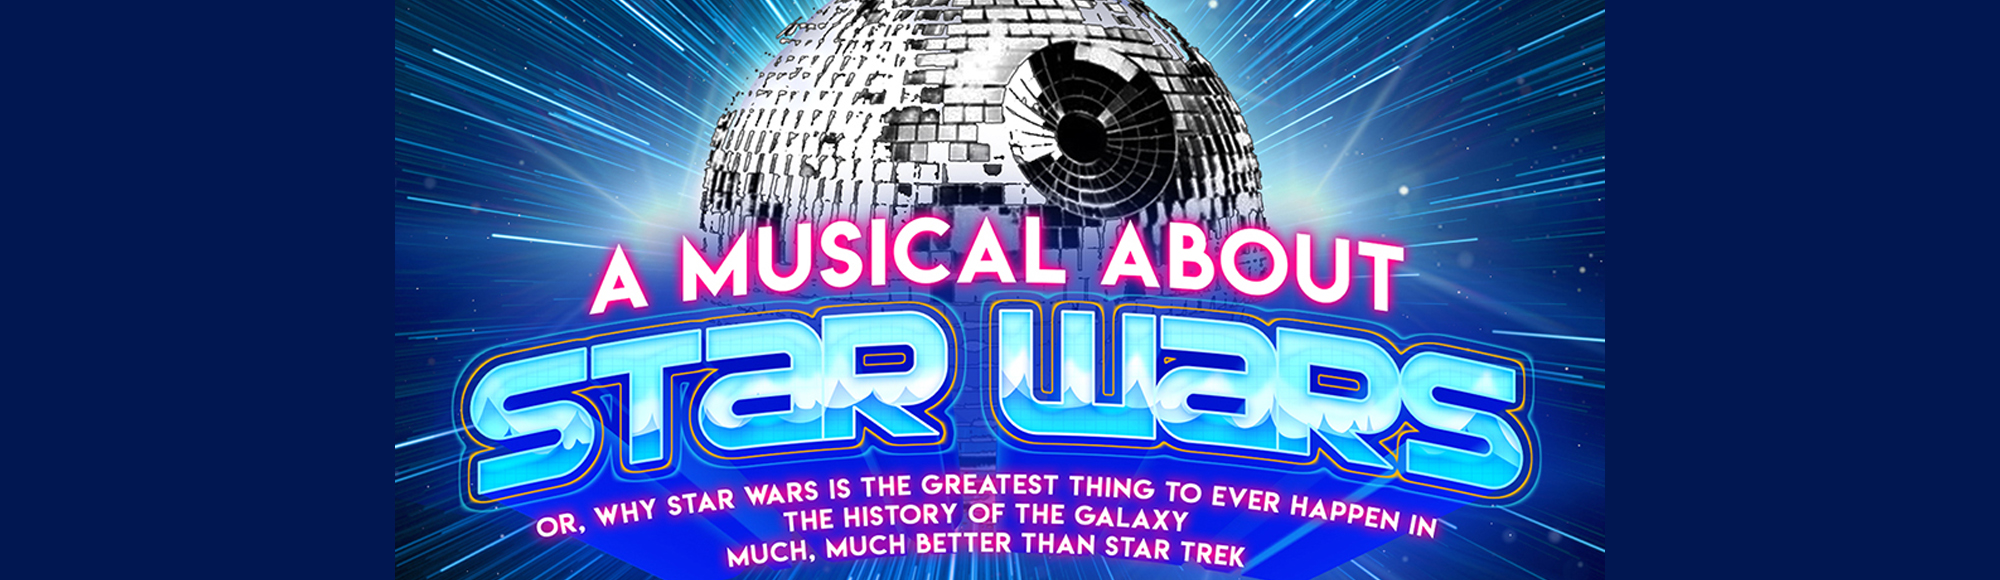 A Musical About Star Wars show